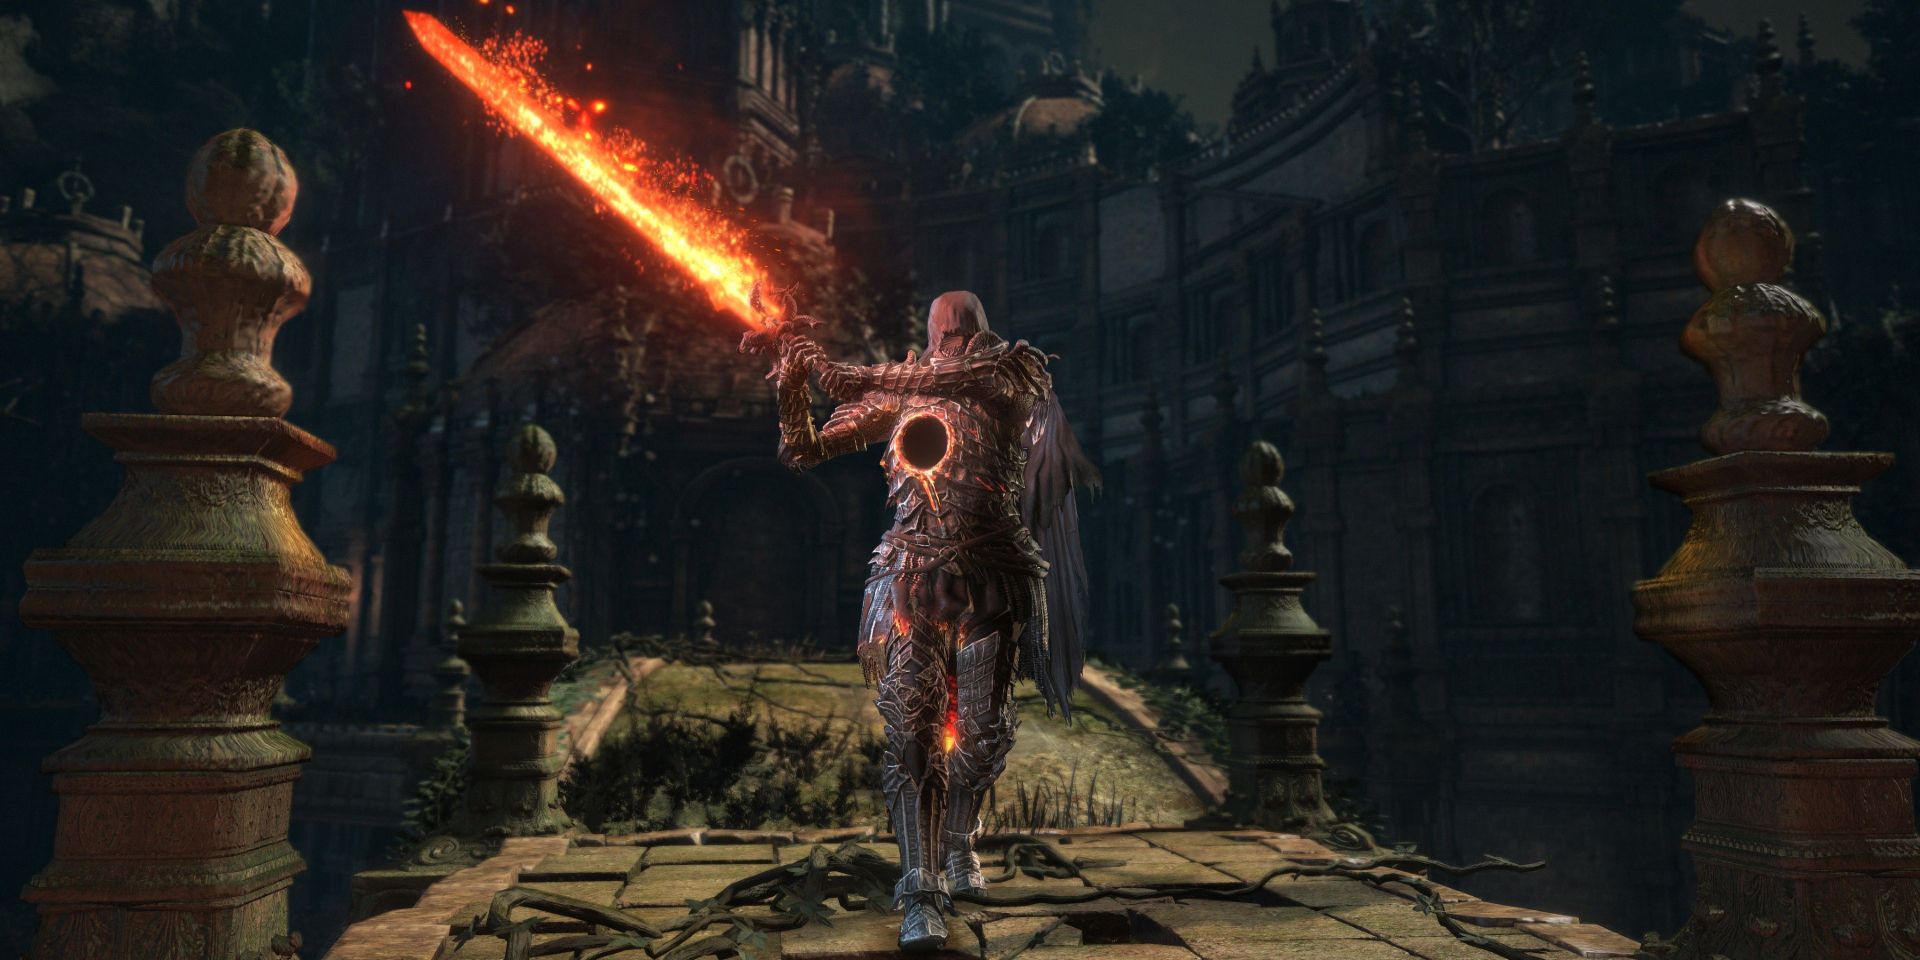 A screenshot from Dark Souls 3's The Ringed City DLC showing an armored figure with a flaming sword and a circular hole in their chest